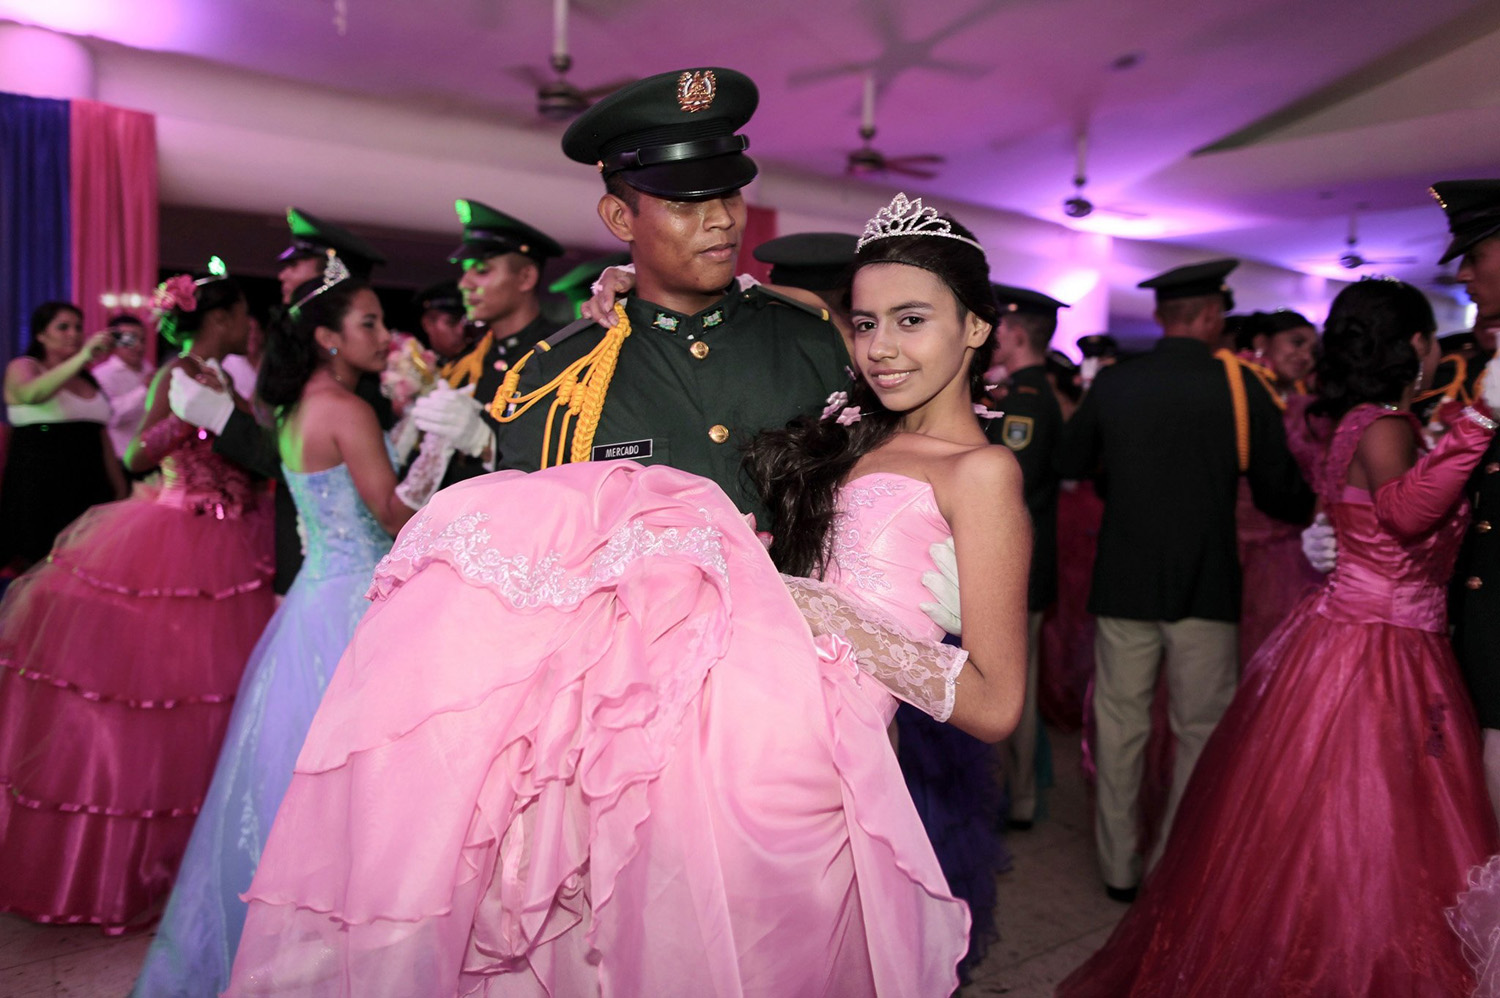 A cancer patient dances with a cadet from Nicaragua's Military Academy during her "Quinceanera" (15th birthday) party at a hotel in Managua